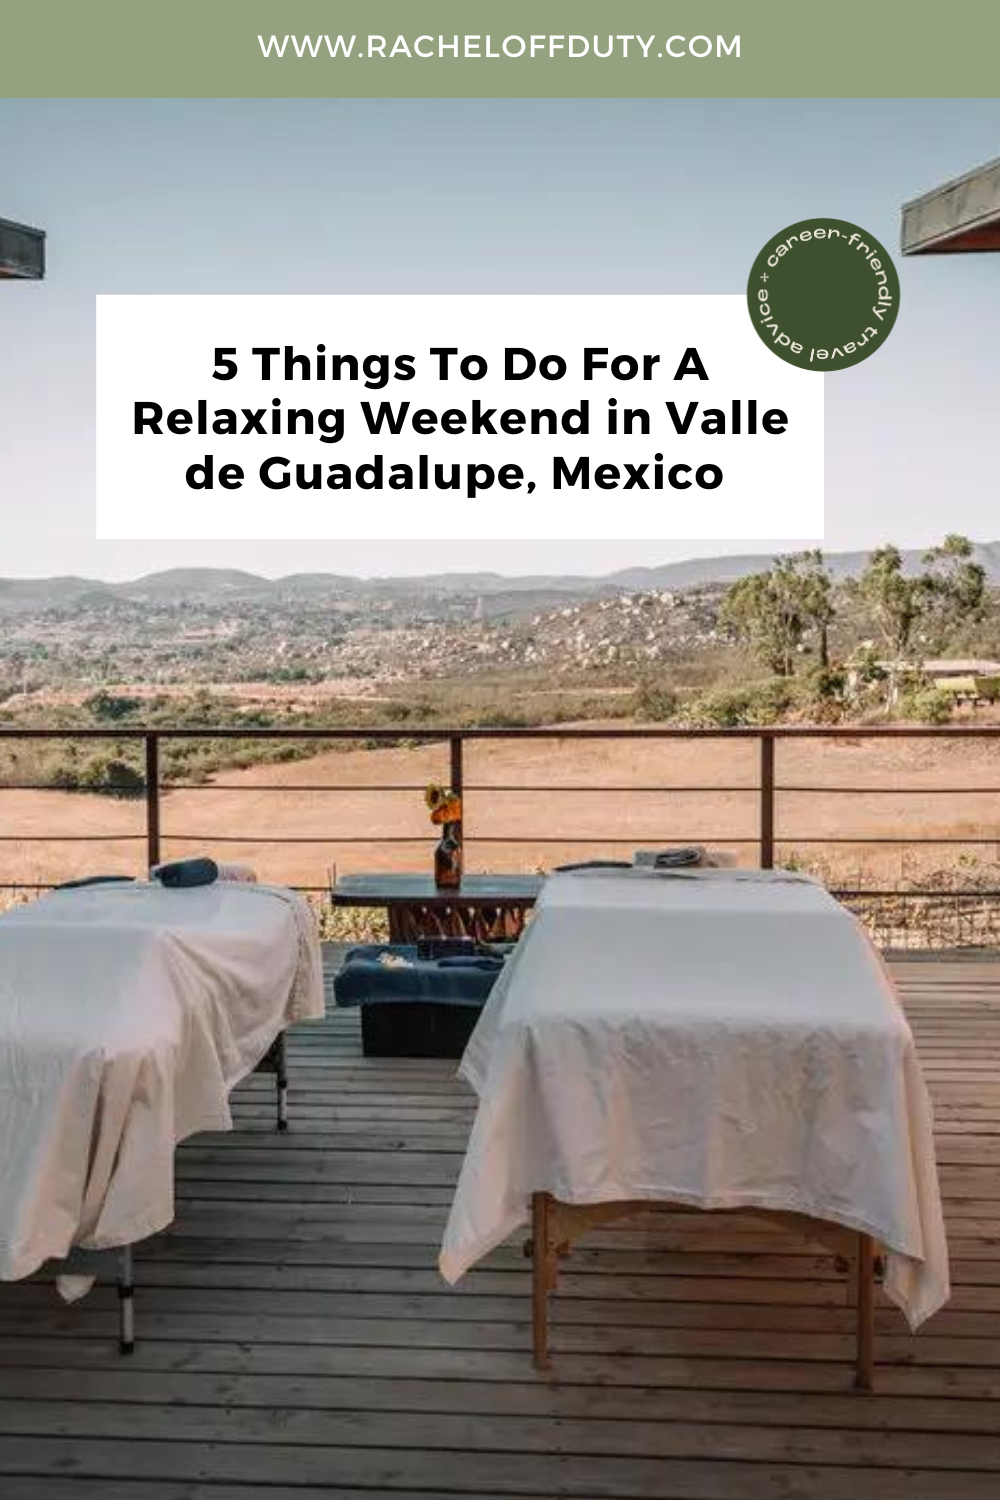 Rachel Off Duty: 5 Things To Do For A Relaxing Weekend in Valle de Guadalupe, Mexico